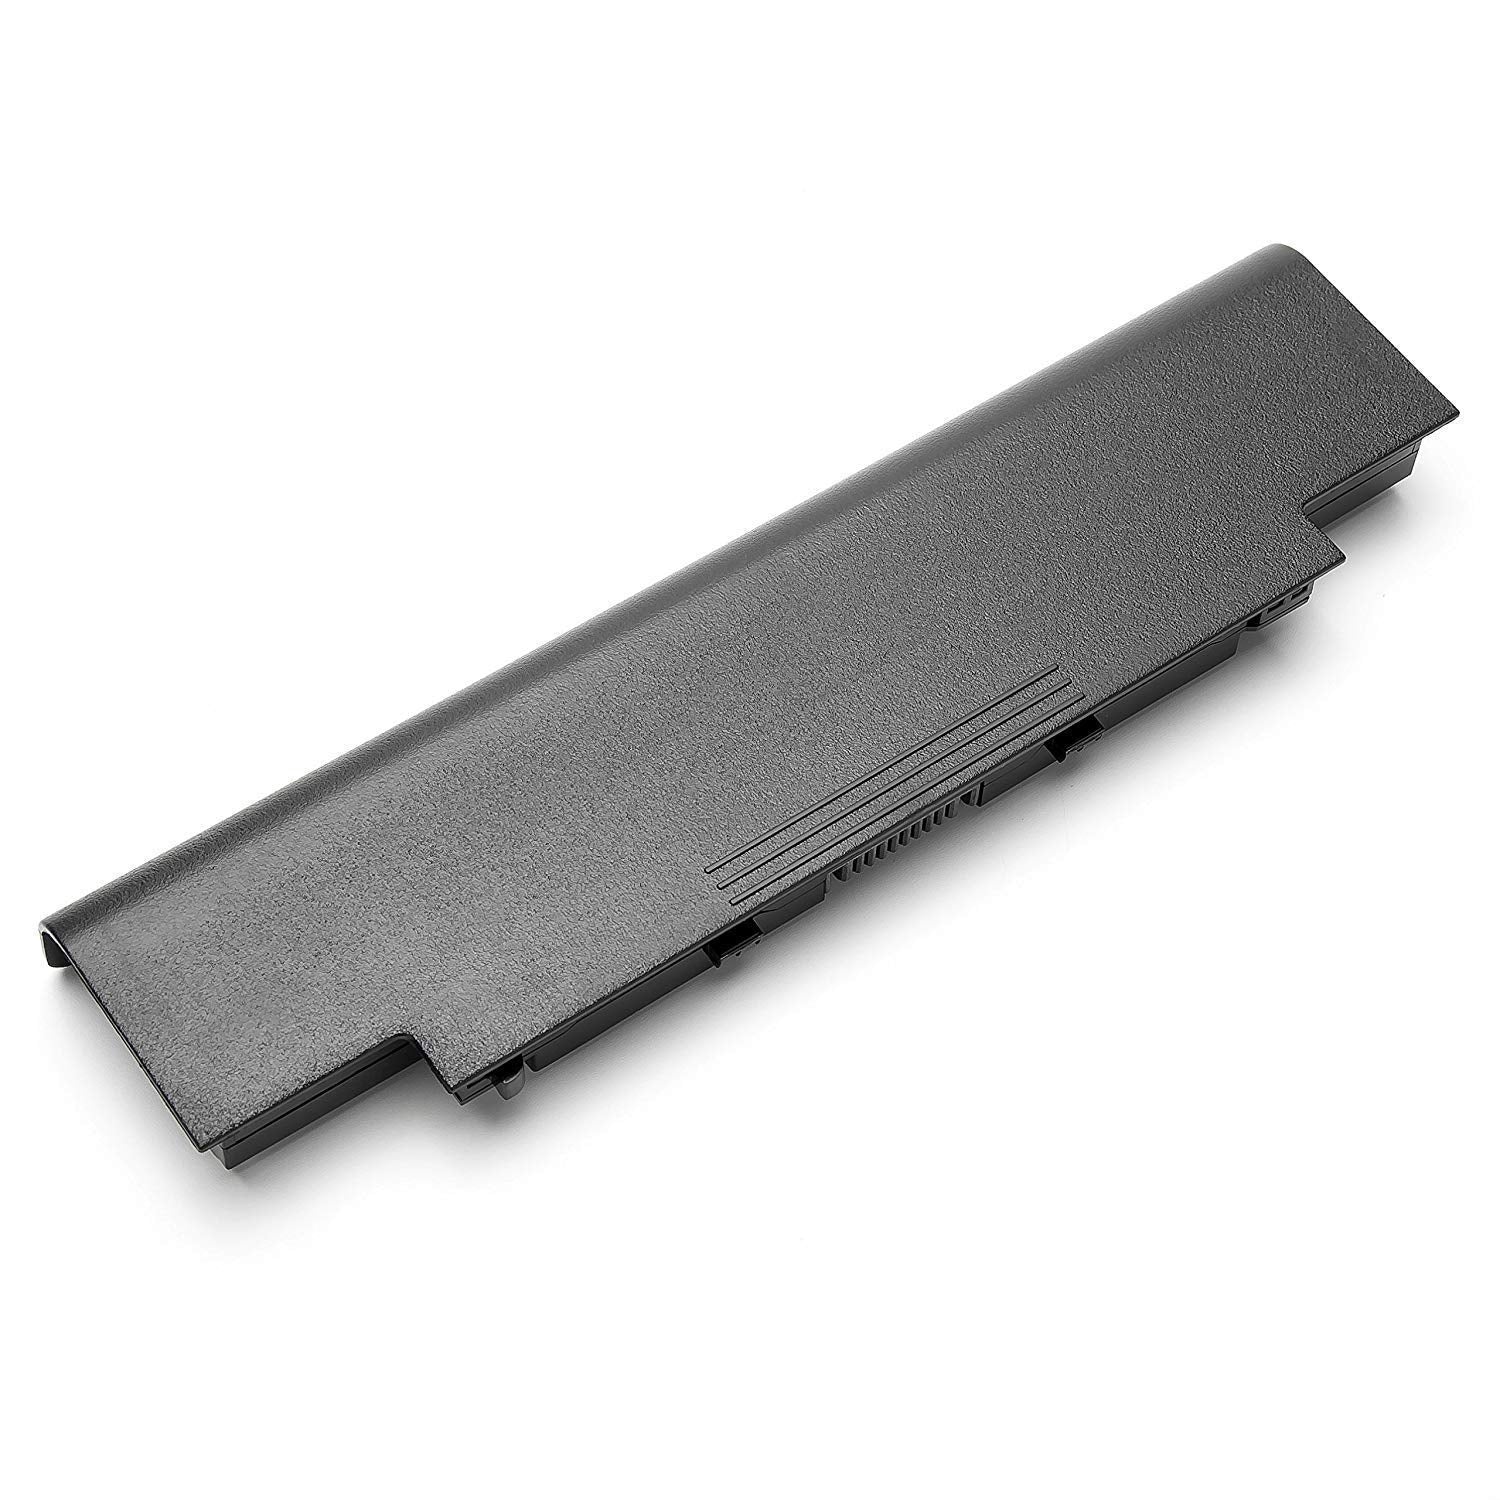 Dell J1KND battery for Dell Inspiron N5010, N5110, N5050, N5040, N4010, N4110 Vostro 1540, 2520, 3550, 3450, 13R, 14R, 15R, 17R, Series Laptop's.